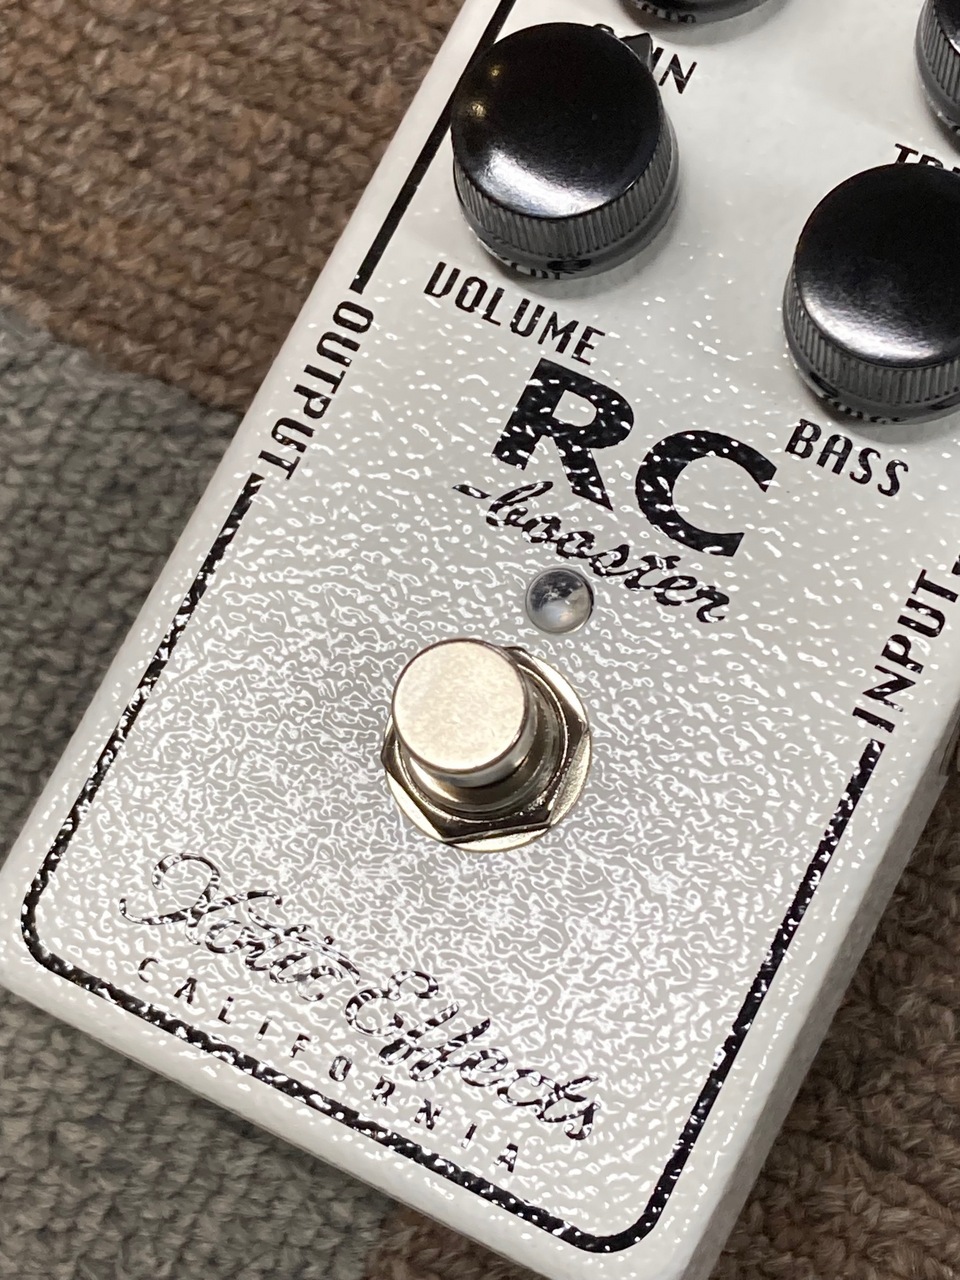 Xotic RC Booster Classic Limited Edition 20周年記念の復刻ボックス 